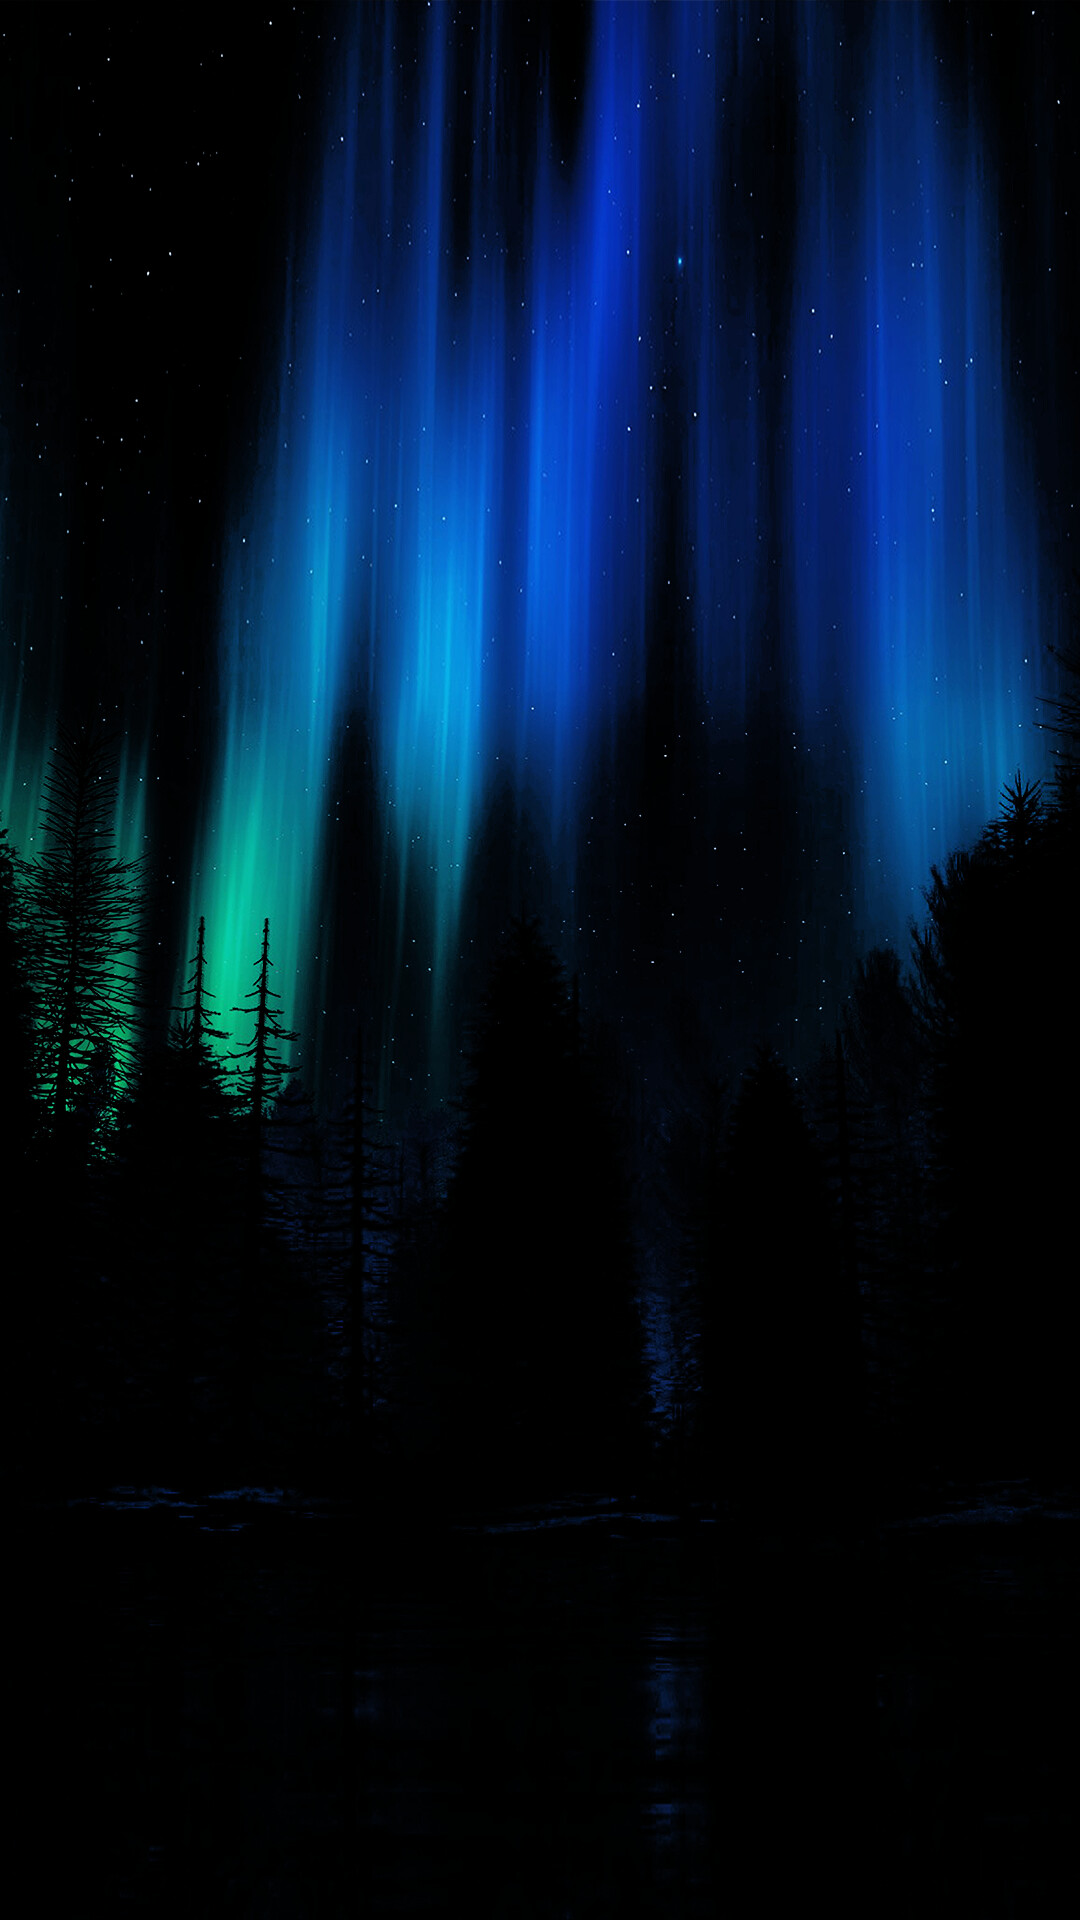 Aurora Borealis: A natural light display in the sky, Atmospheric phenomenon. 1080x1920 Full HD Background.